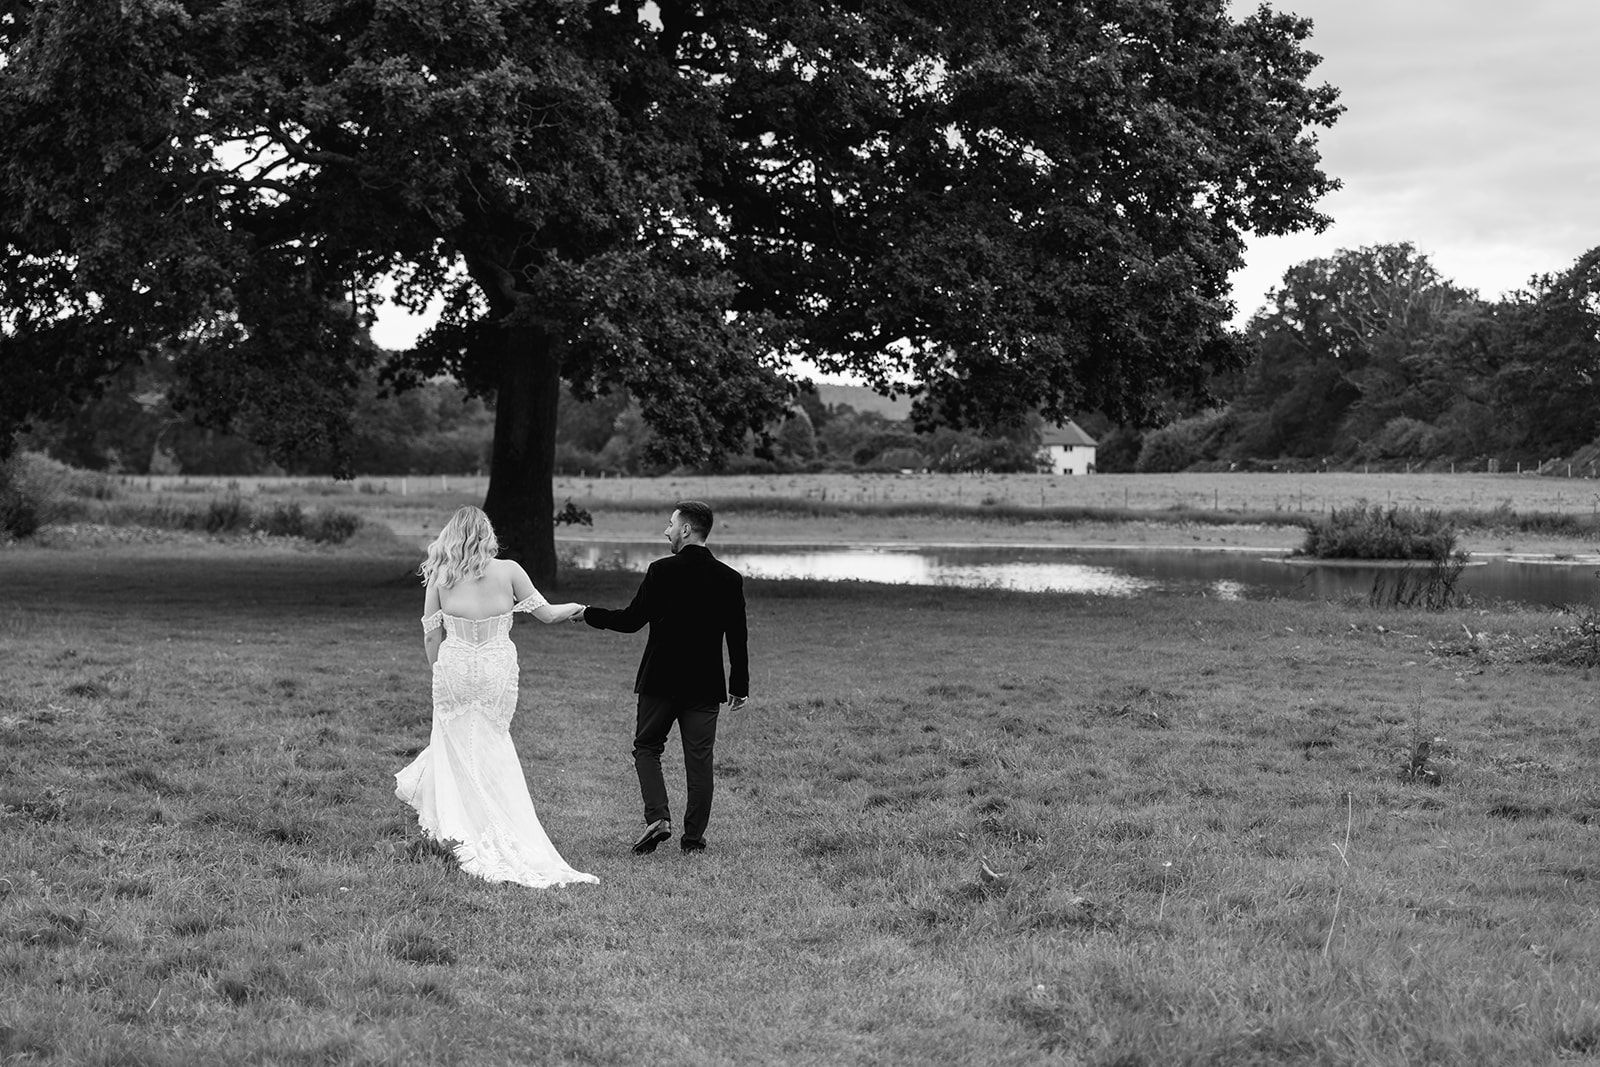 Bride and groom couples portraits at a Southlands barn wedding, Sussex. Photo by OliveJoy Photography.